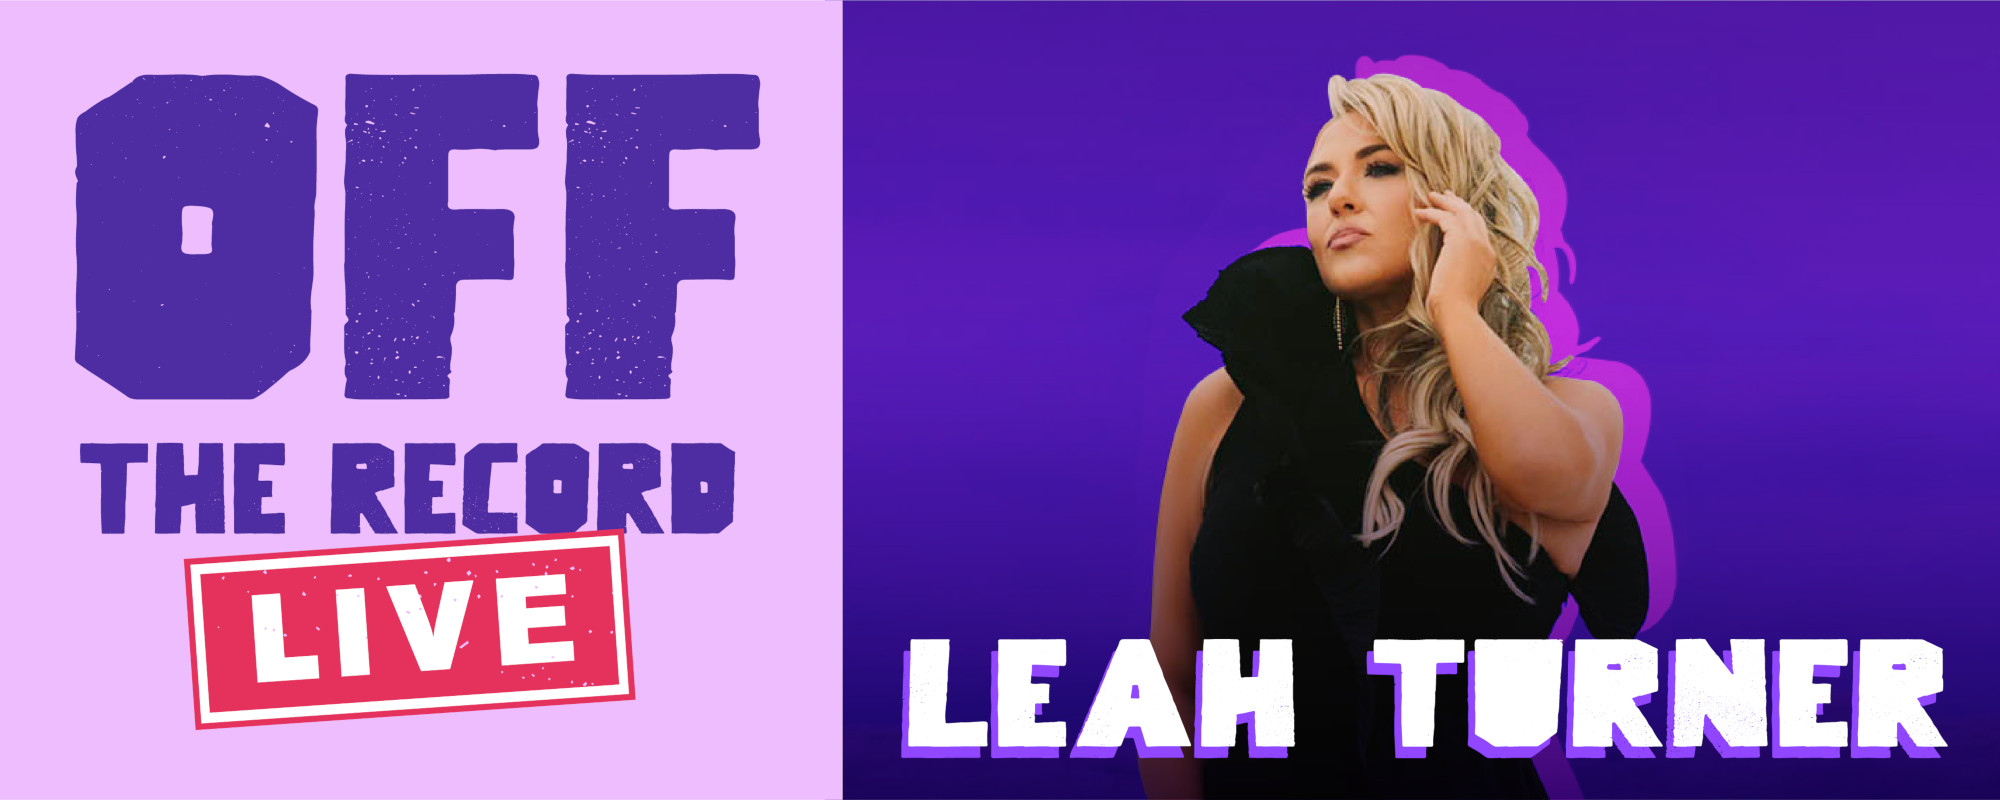 Off The Record Live: Leah Turner Brings Latin Heritage to Latest EP ‘Lost in Translation’